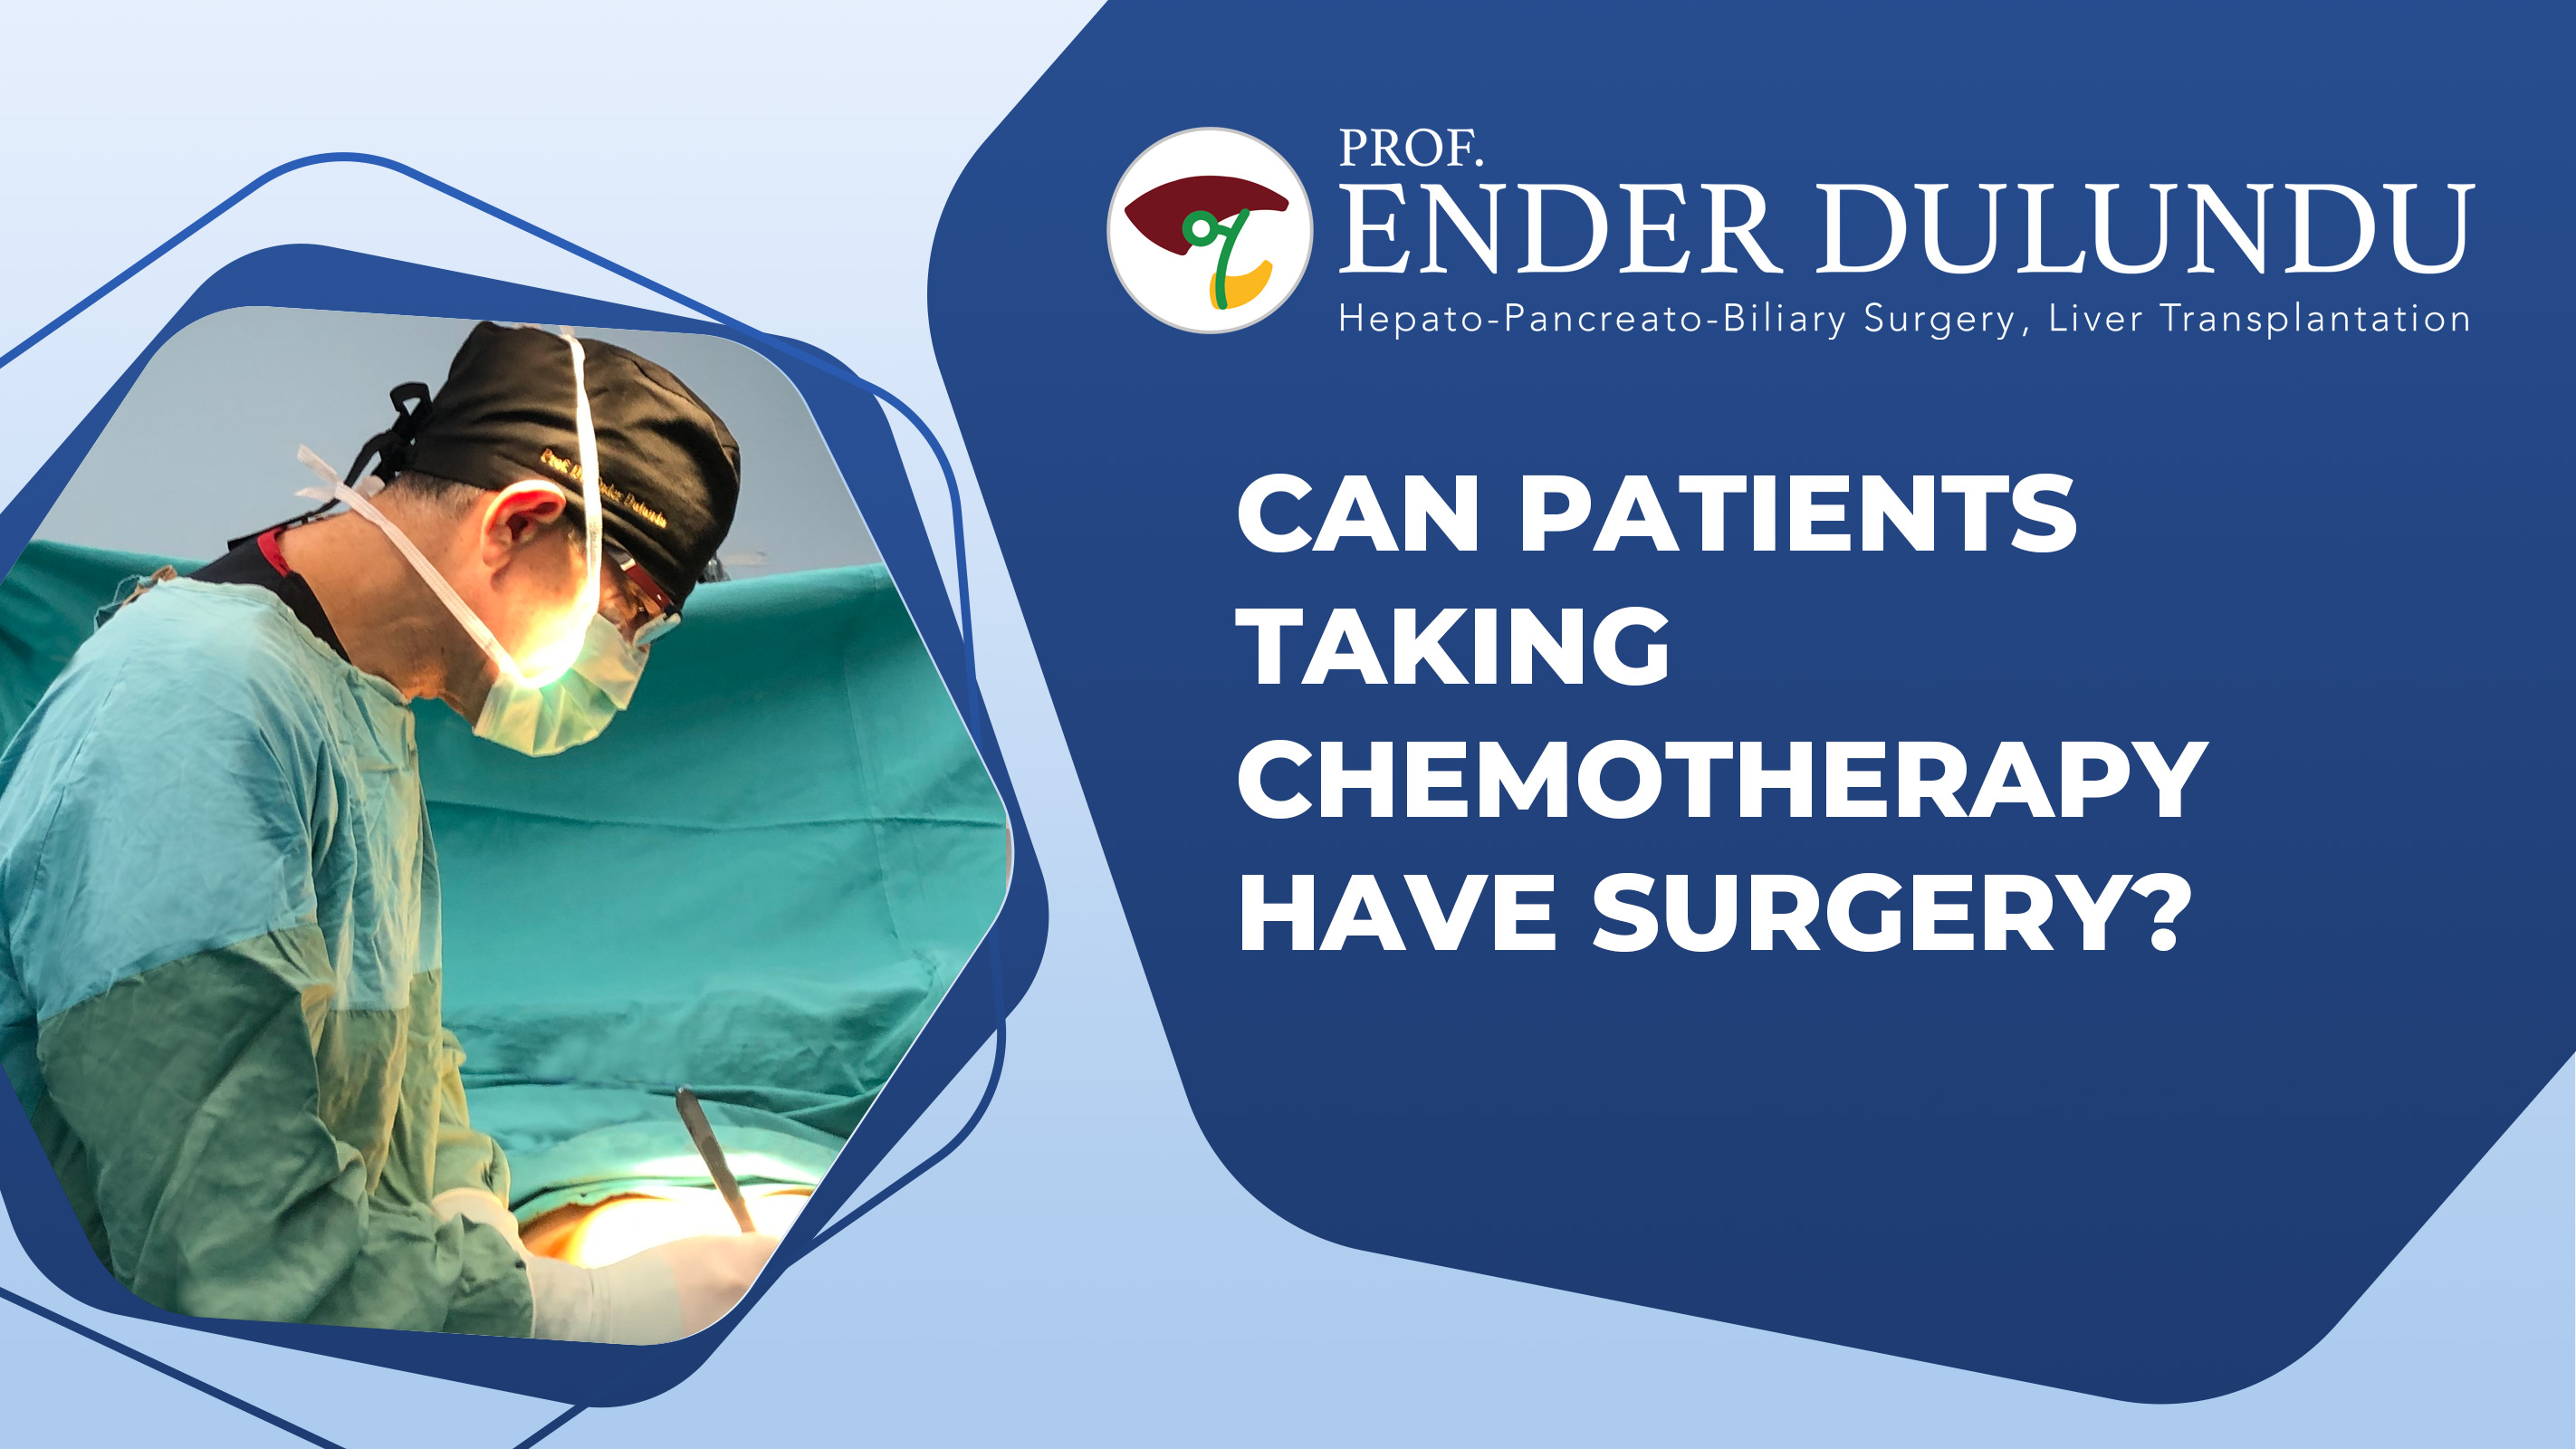 Can Patients Taking Chemotherapy Have Surgery?